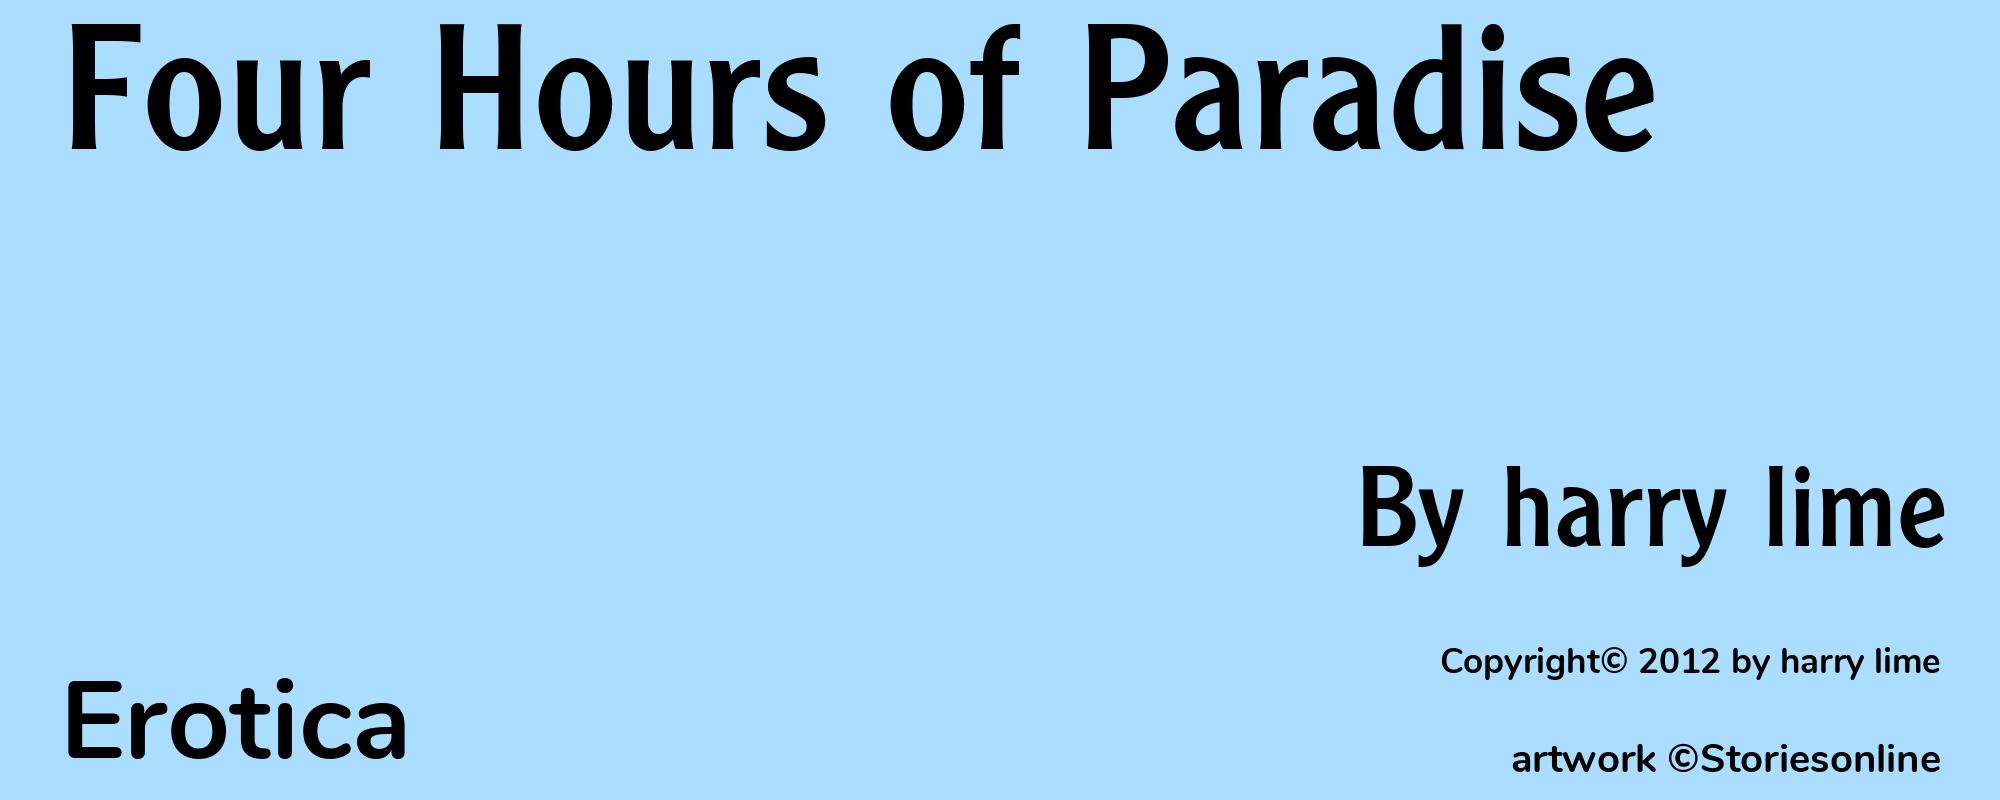 Four Hours of Paradise - Cover